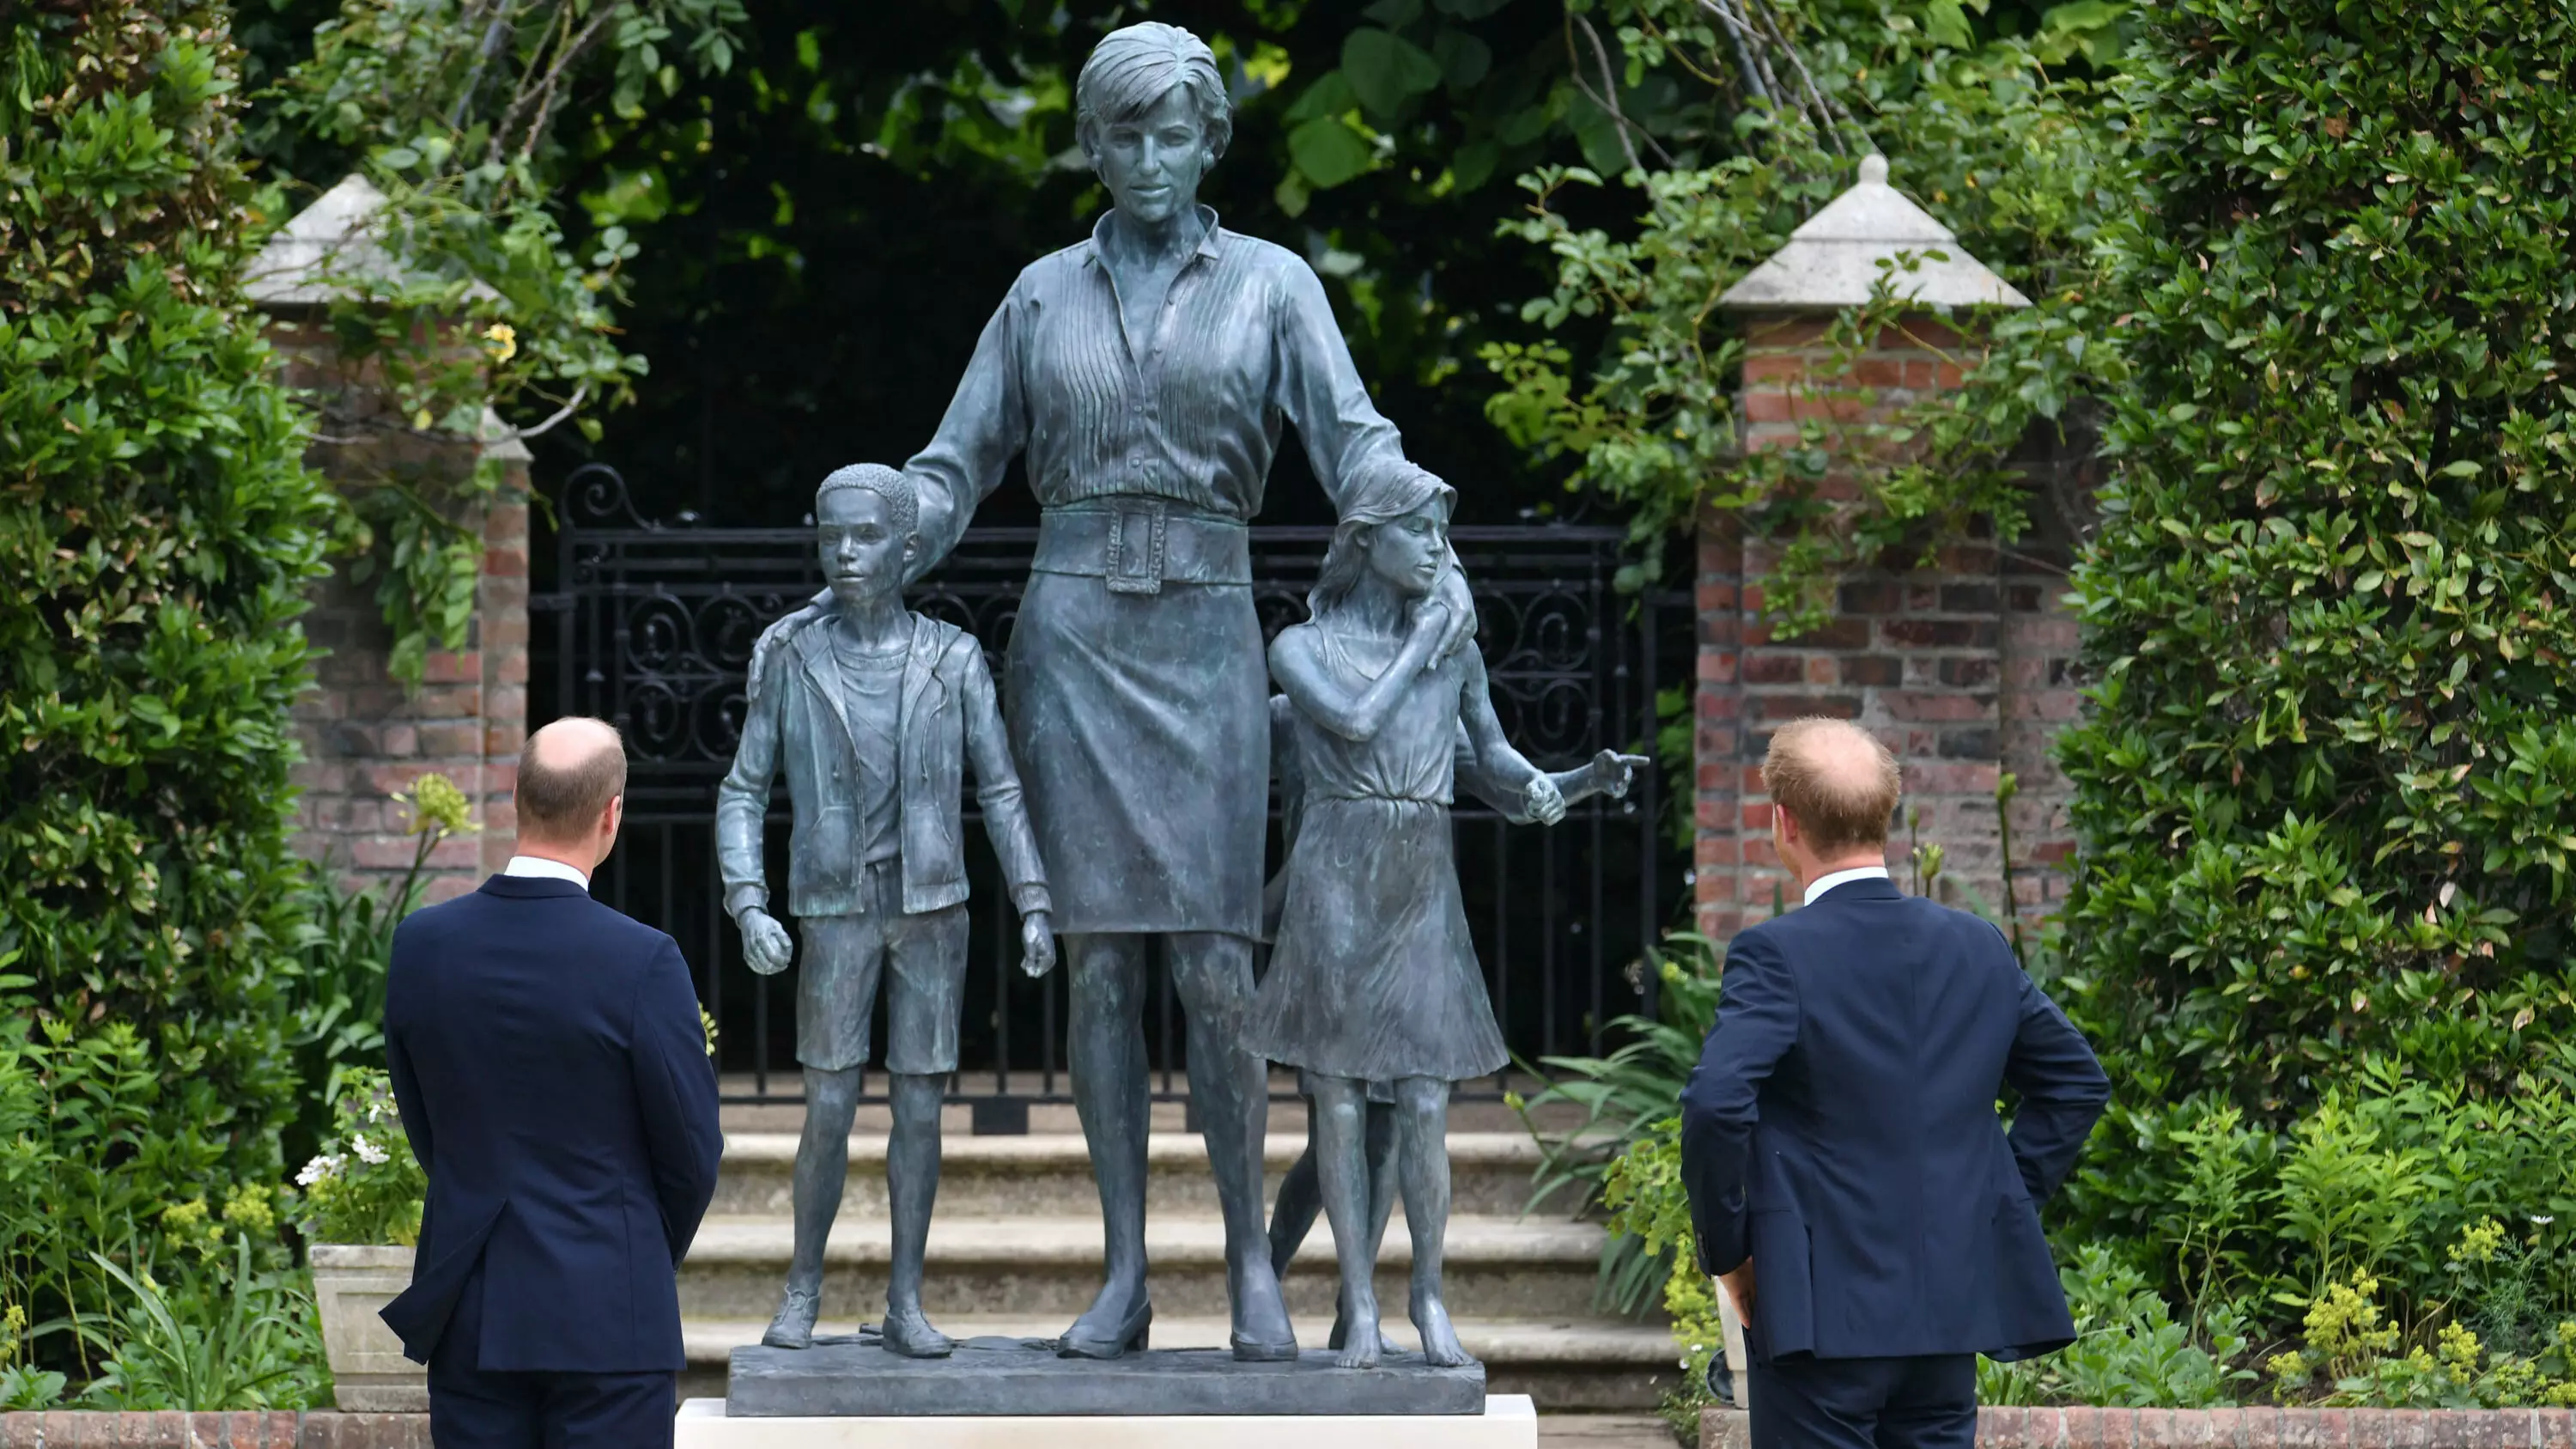 Statue Of Princess Diana Unveiled At Kensington Palace By Prince William And Prince Harry